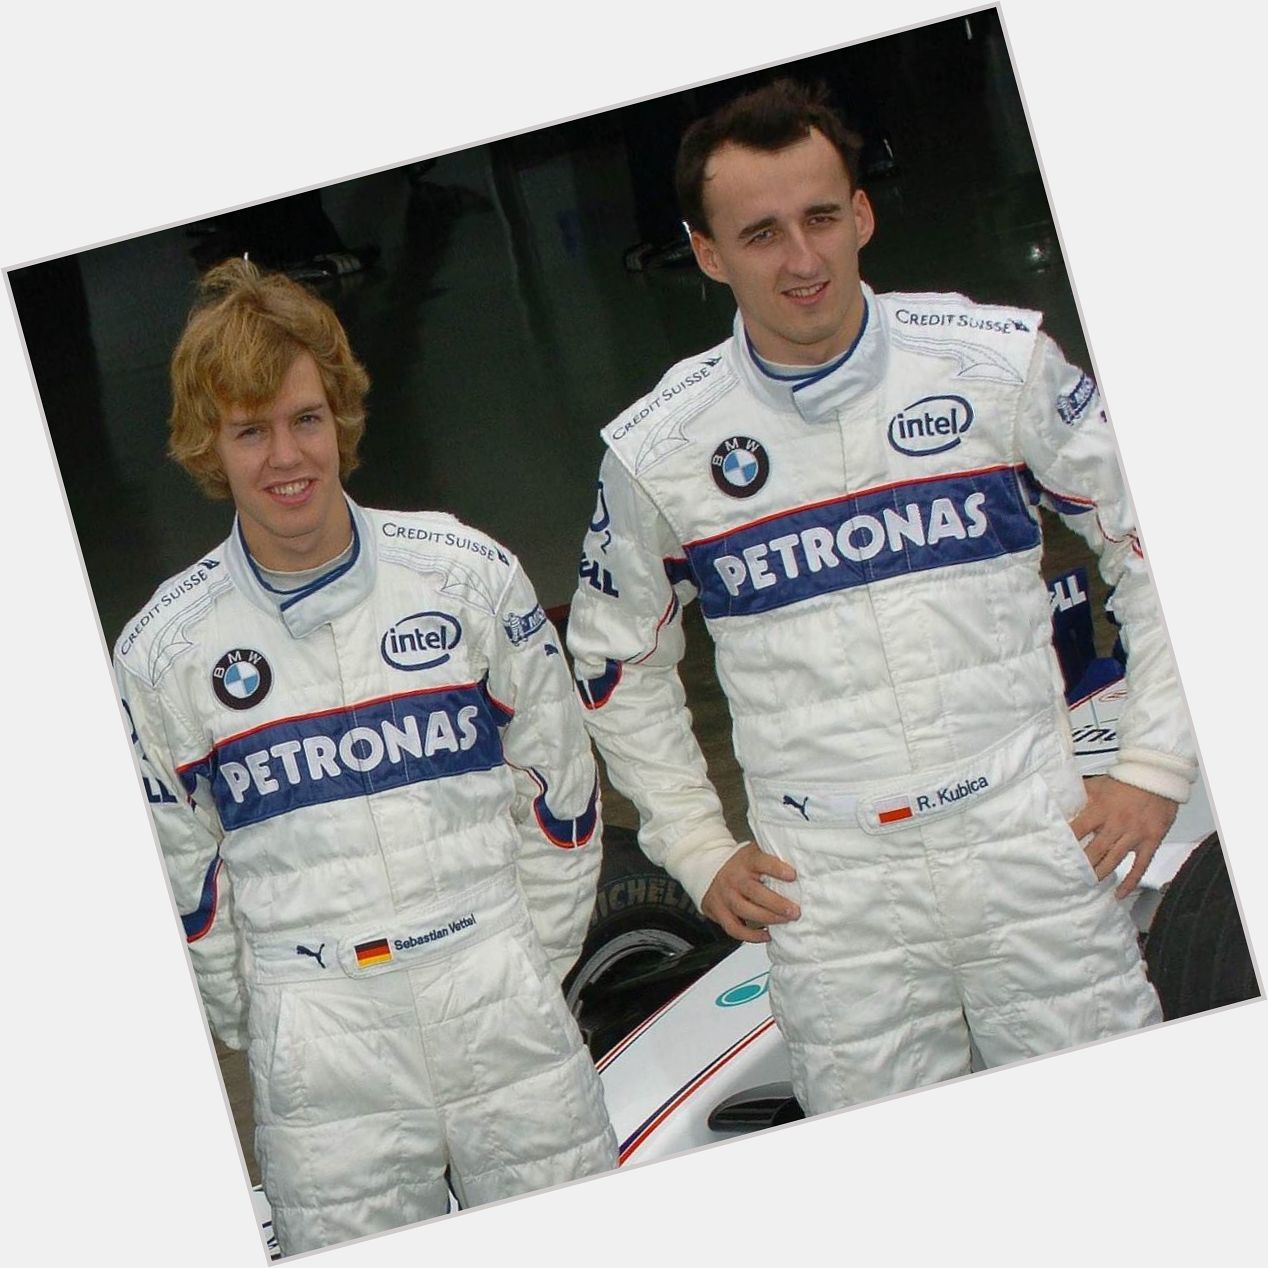 Happy Birthday to Robert Kubica, who turns 31 today!

Pic: Sebastian Vettel with Kubica back in 2006, when they wer 